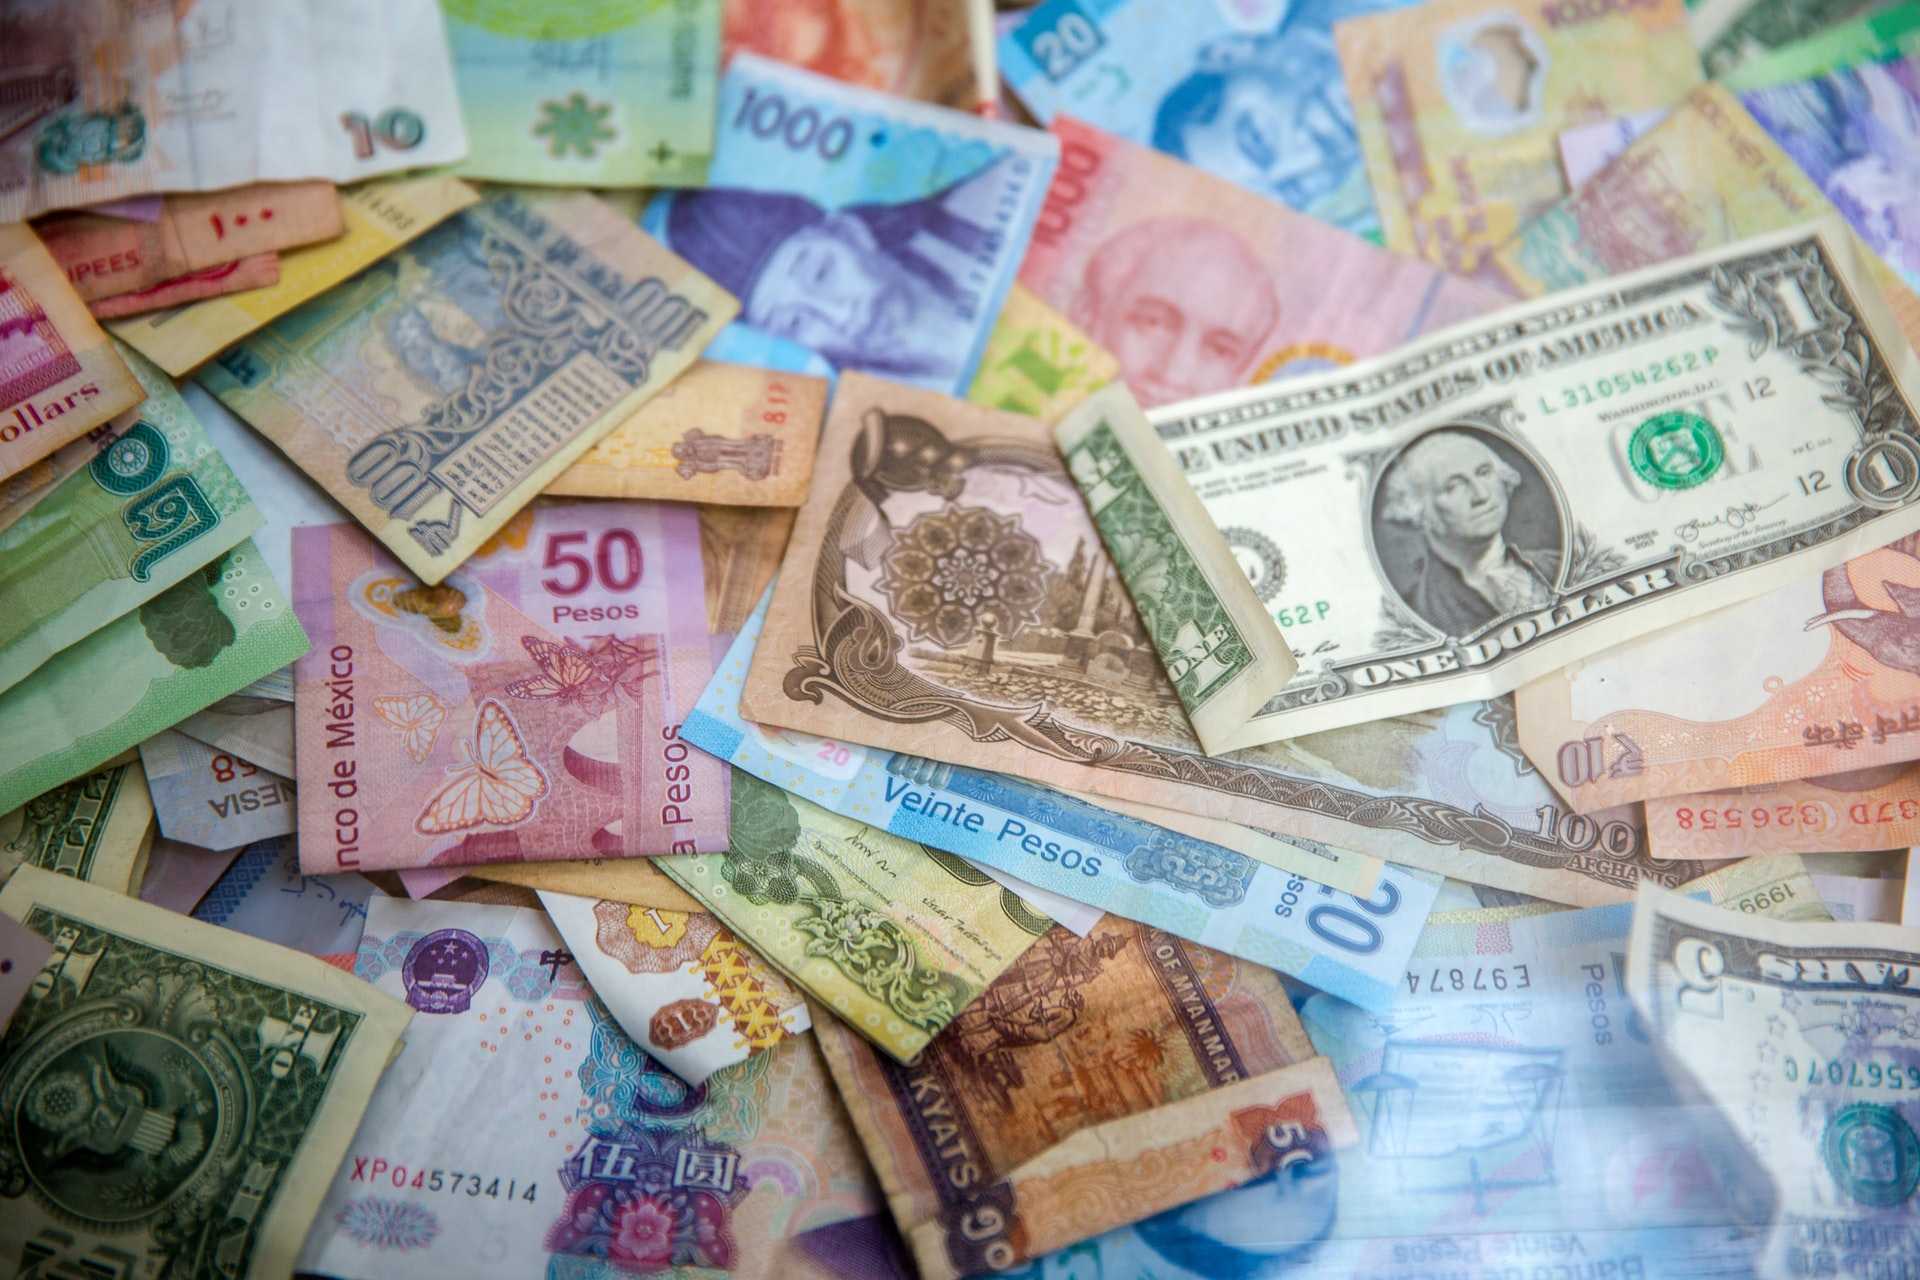 Assortment of bank notes from various countries.